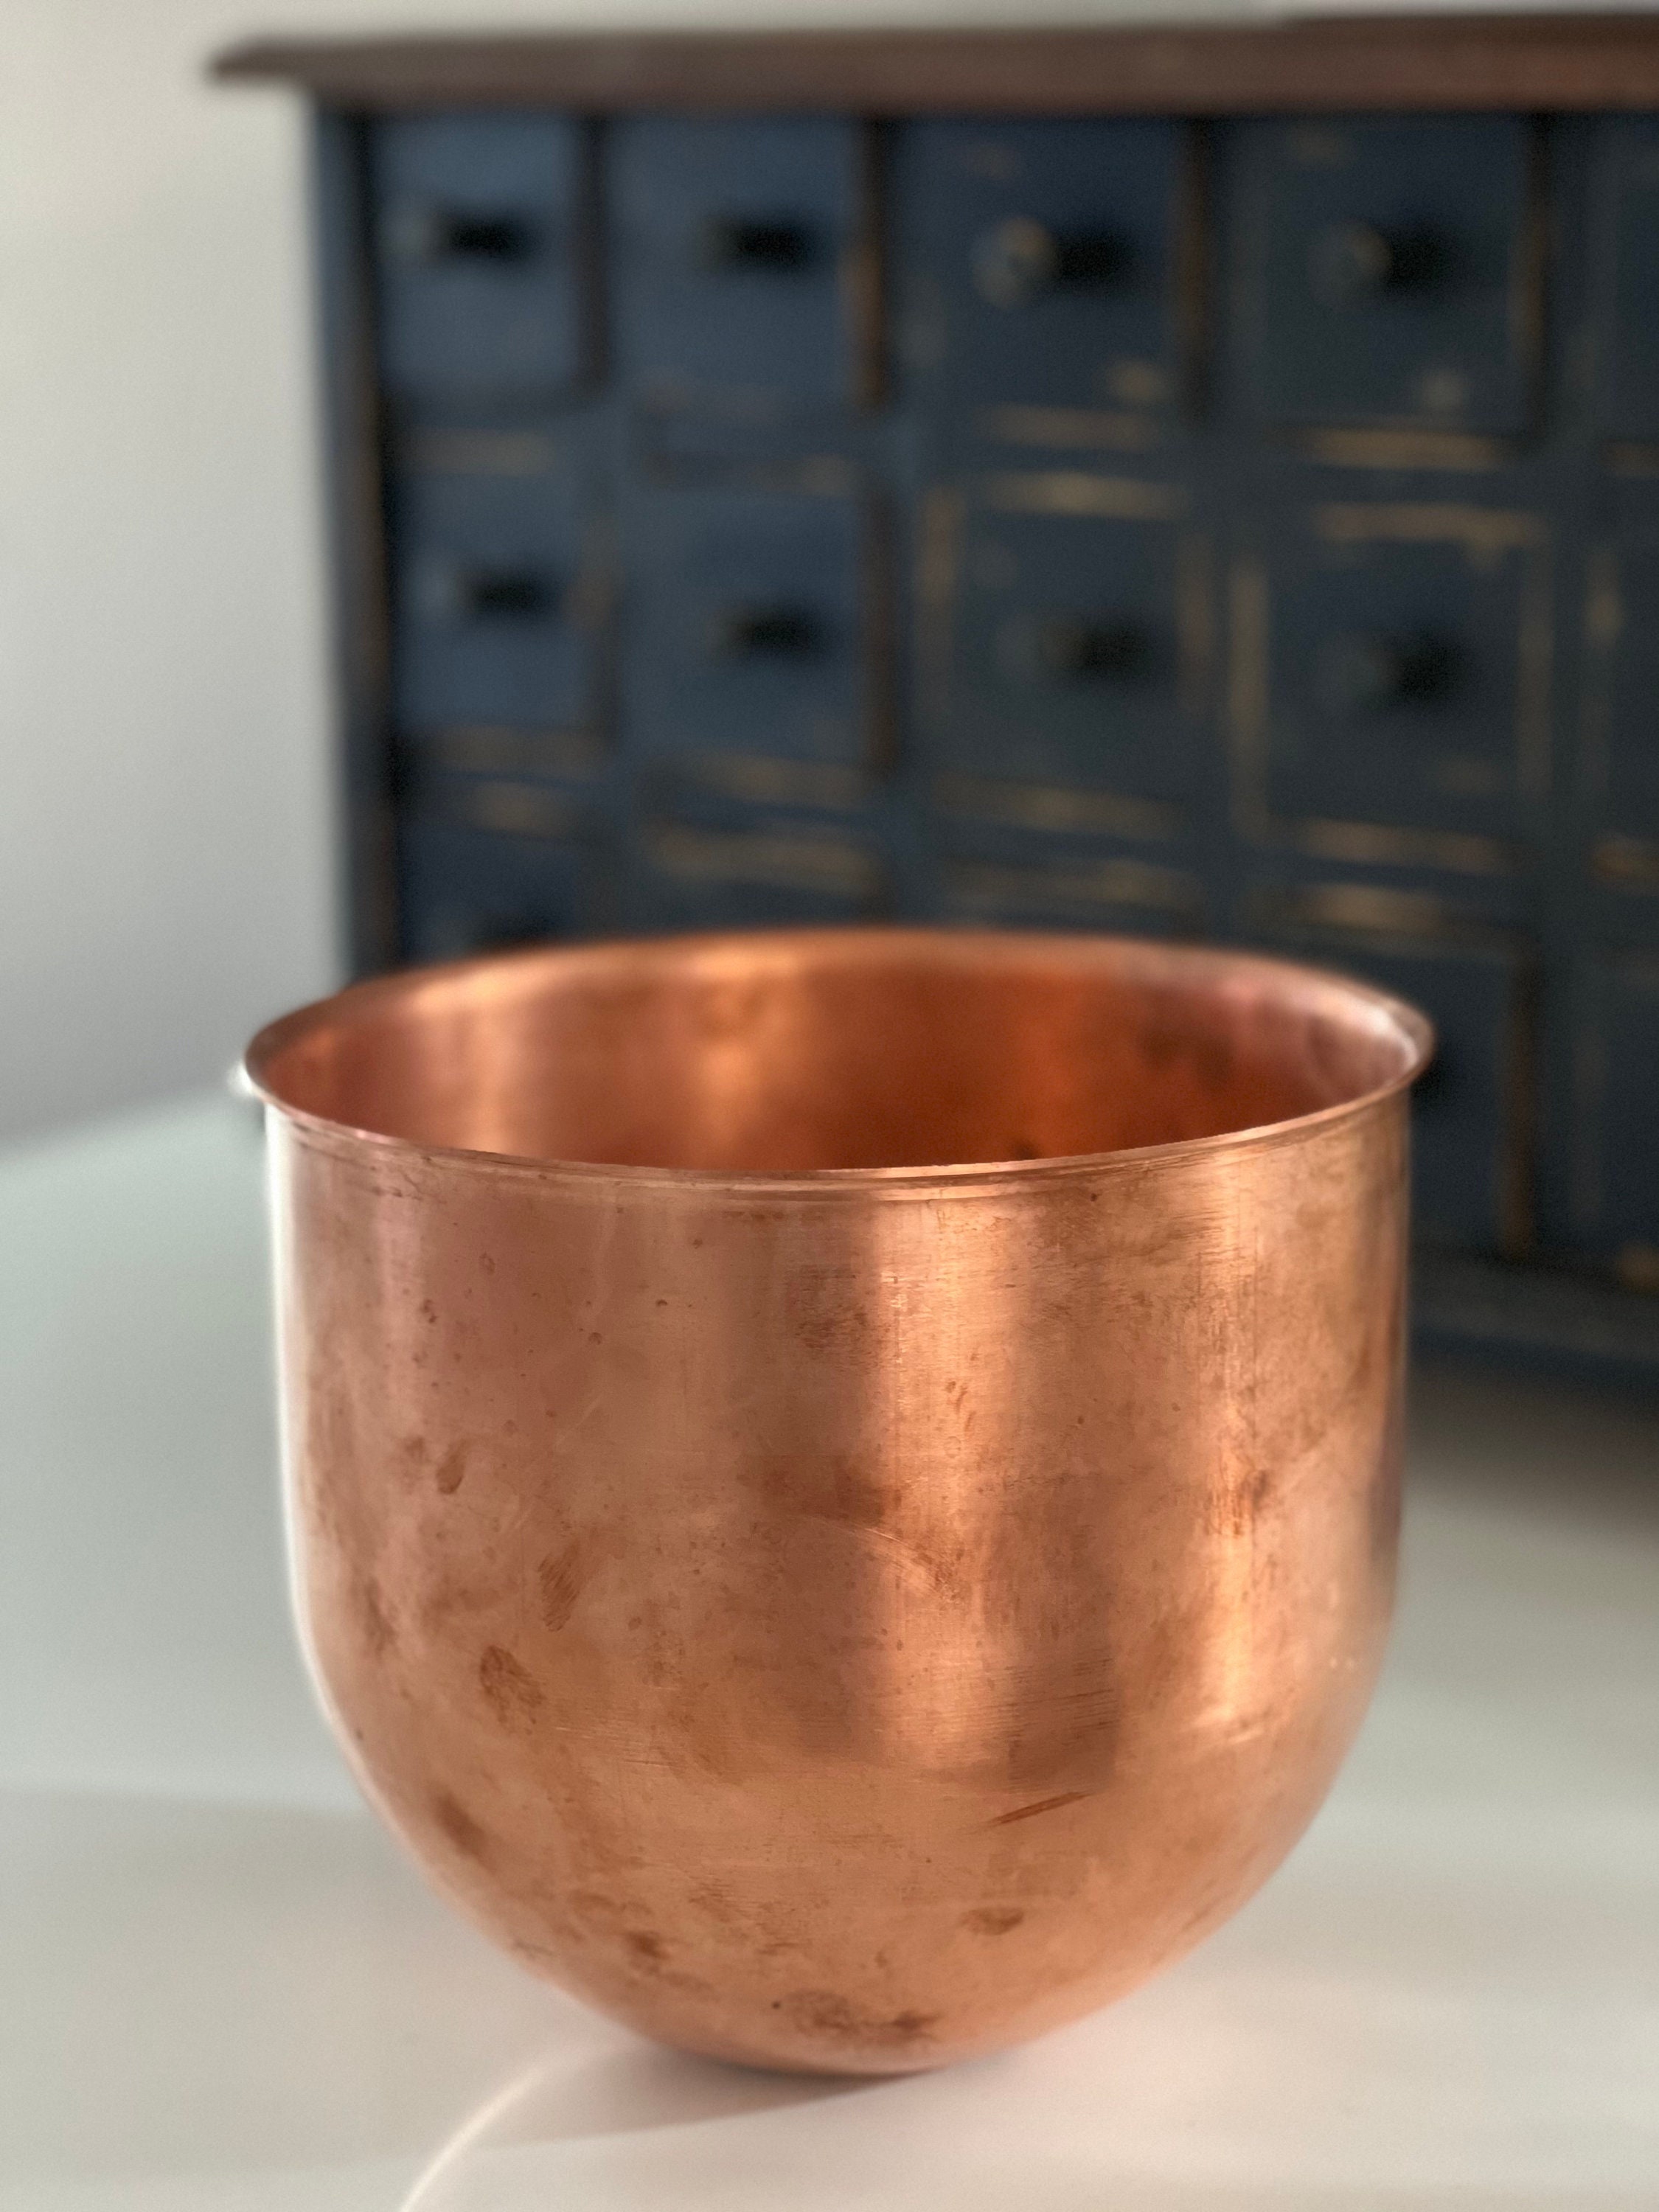 Replacement Mixing Bowl for Kitchenaid Mixer Hammered Copper Mixer